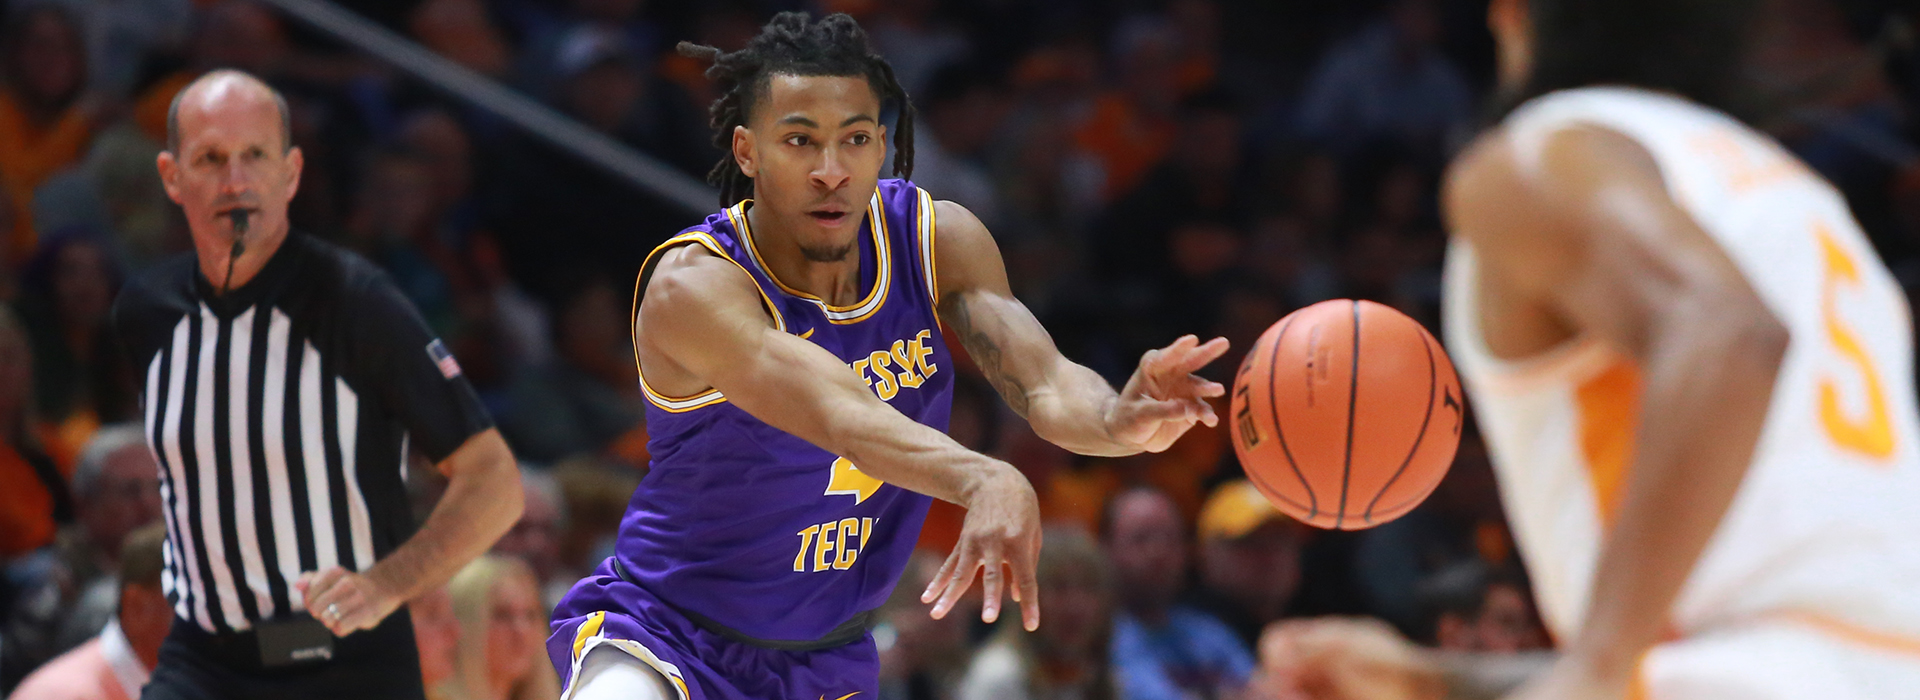 Golden Eagles push No. 15 Vols in 80-69 loss at Thompson-Boling Arena